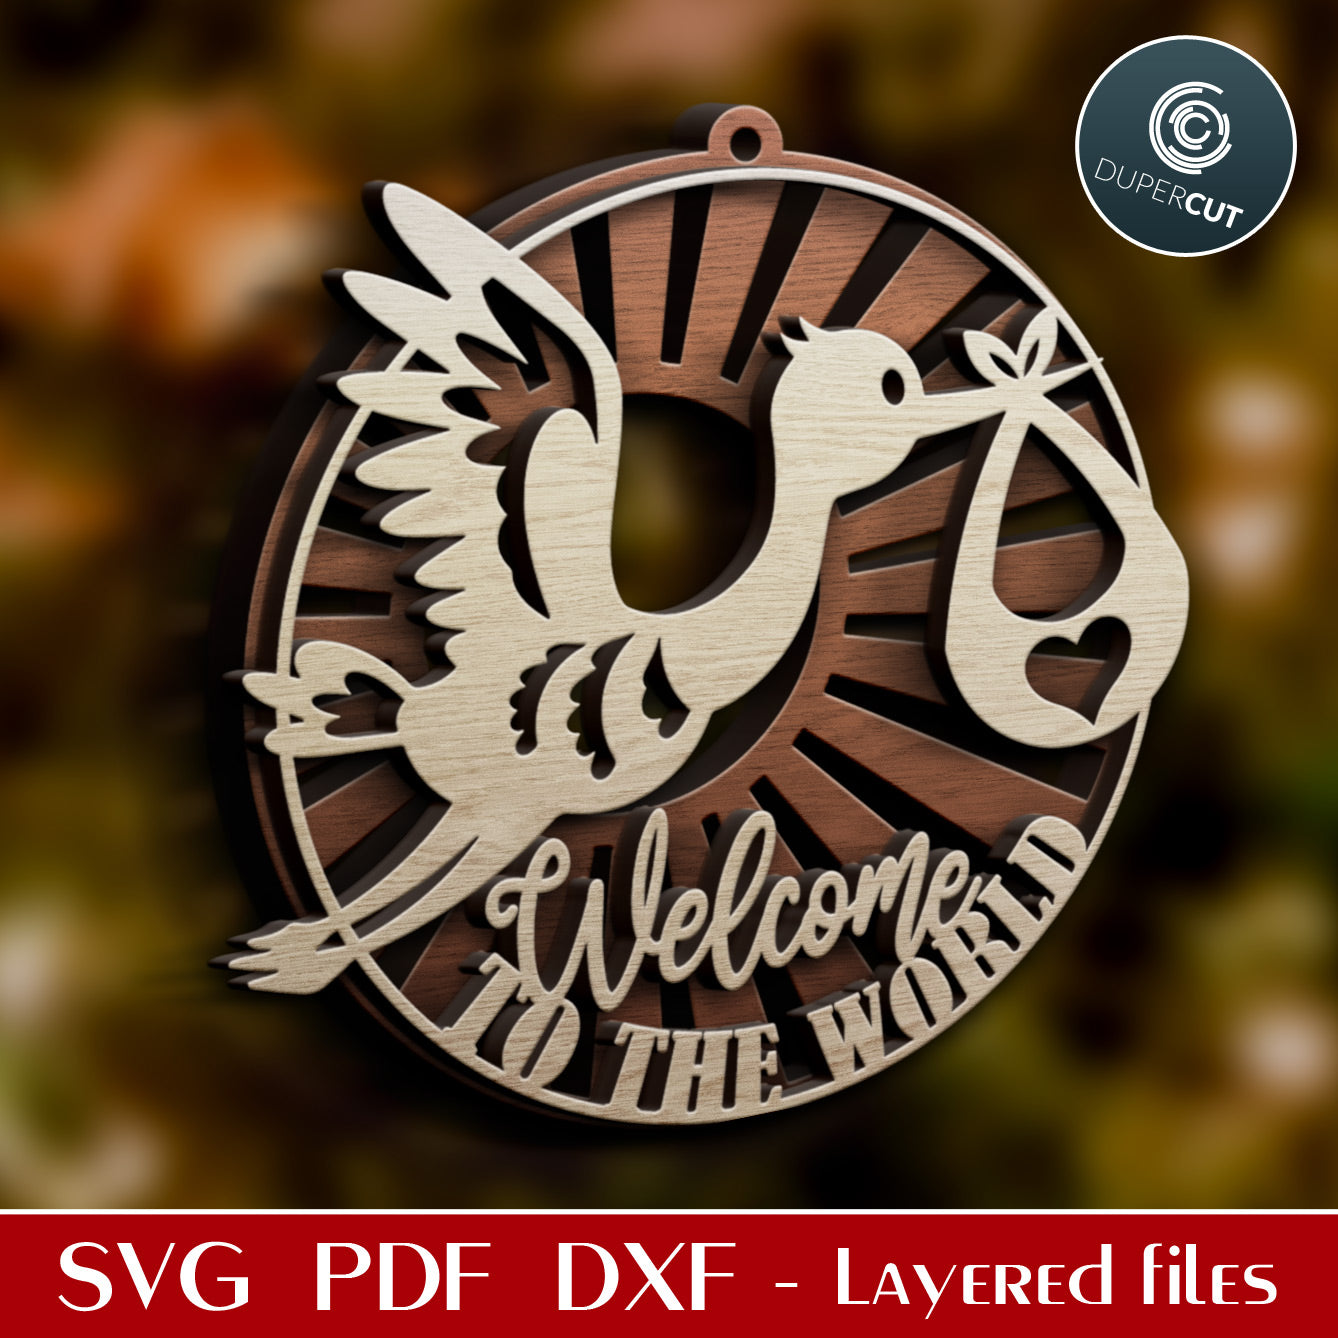 New baby Christmas ornament - Welcome to the world - layered laser files SVG PDF DXF for cutting with Glowforge, Cricut, Silhouette Cameo, CNC machines